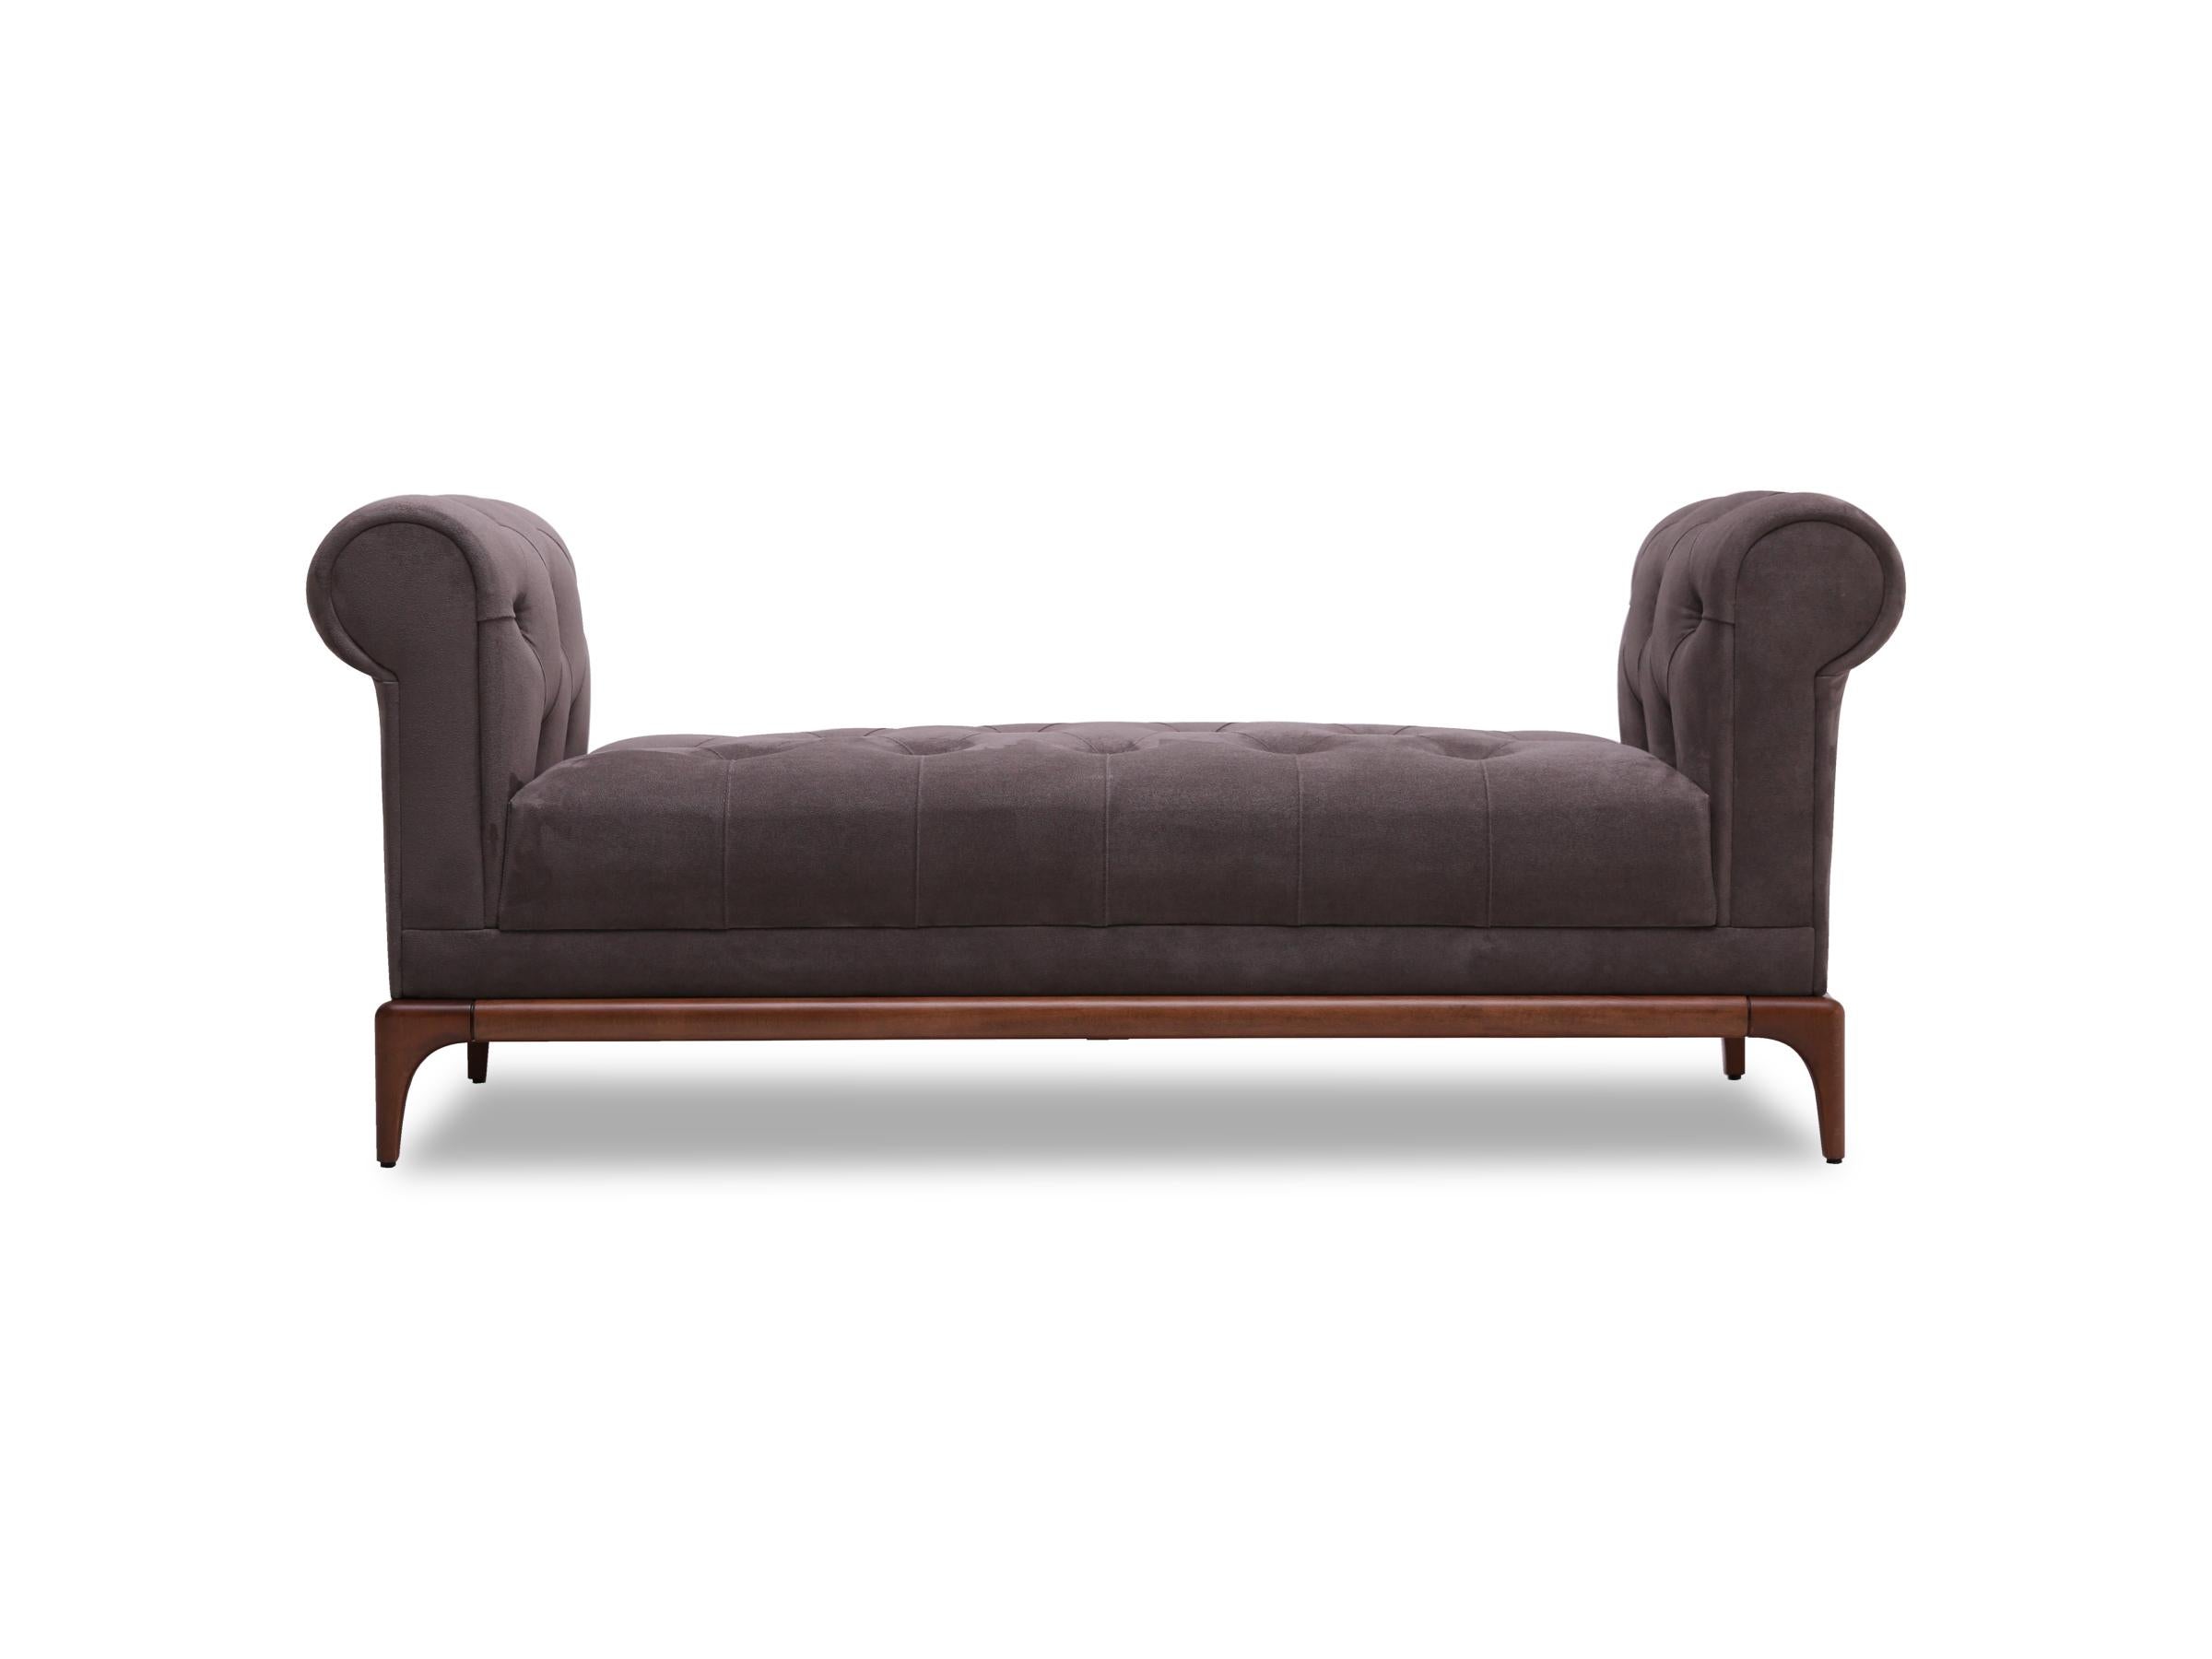 Modern Chester Bench will be a decorative complimentary piece in your living space with its unique style and ambiance characterized by a classical soul. With its distinctive silhouette and its style that is characterized with classical spirit,